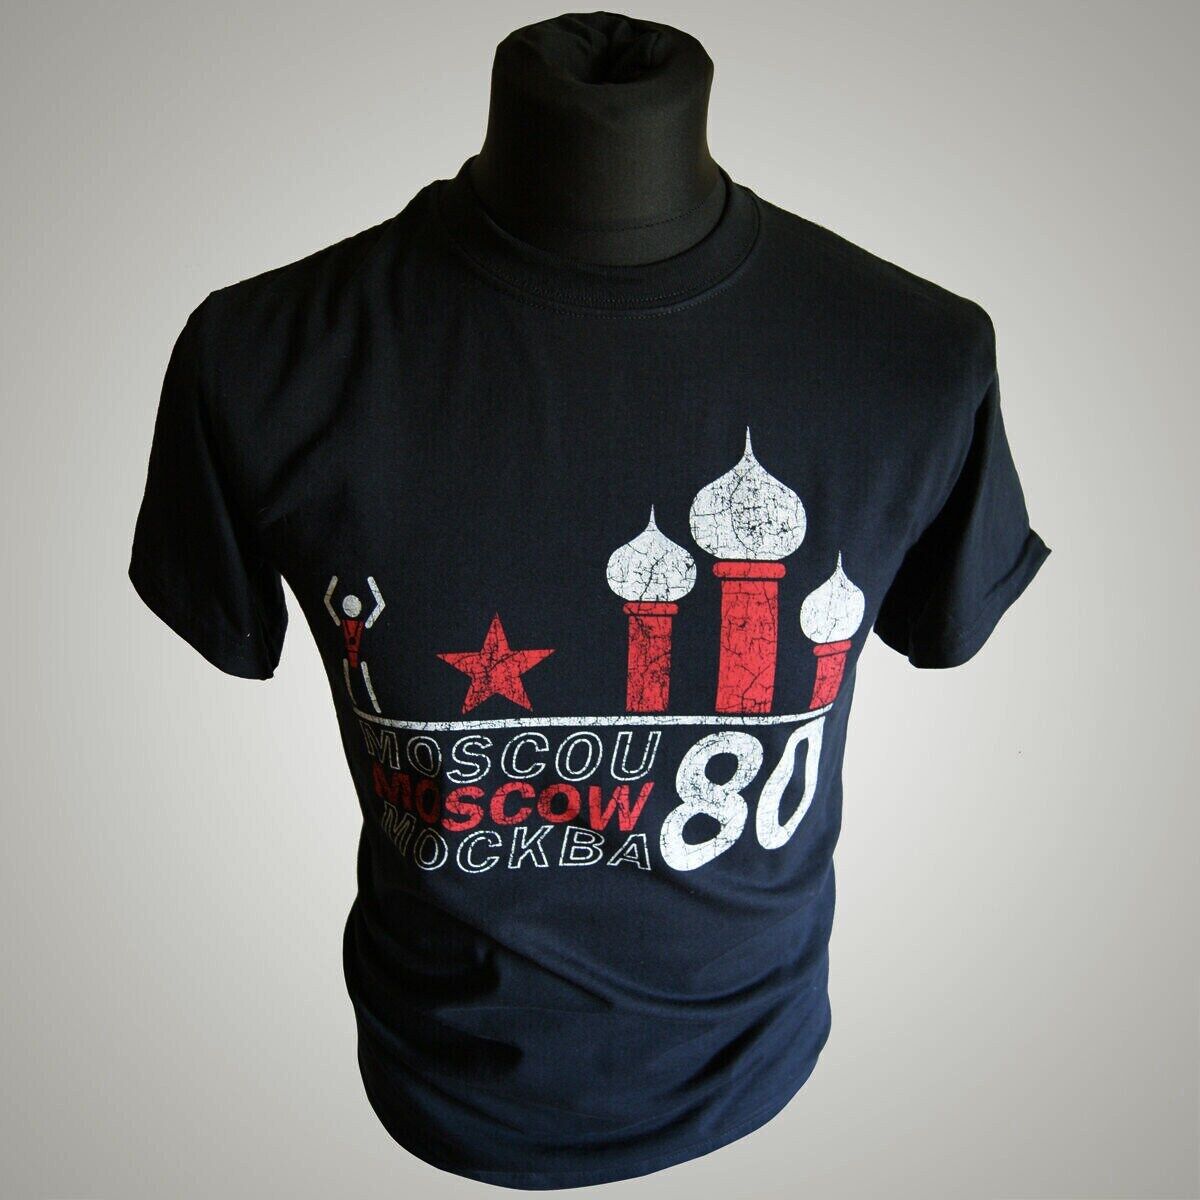 Moscow 80 T Shirt